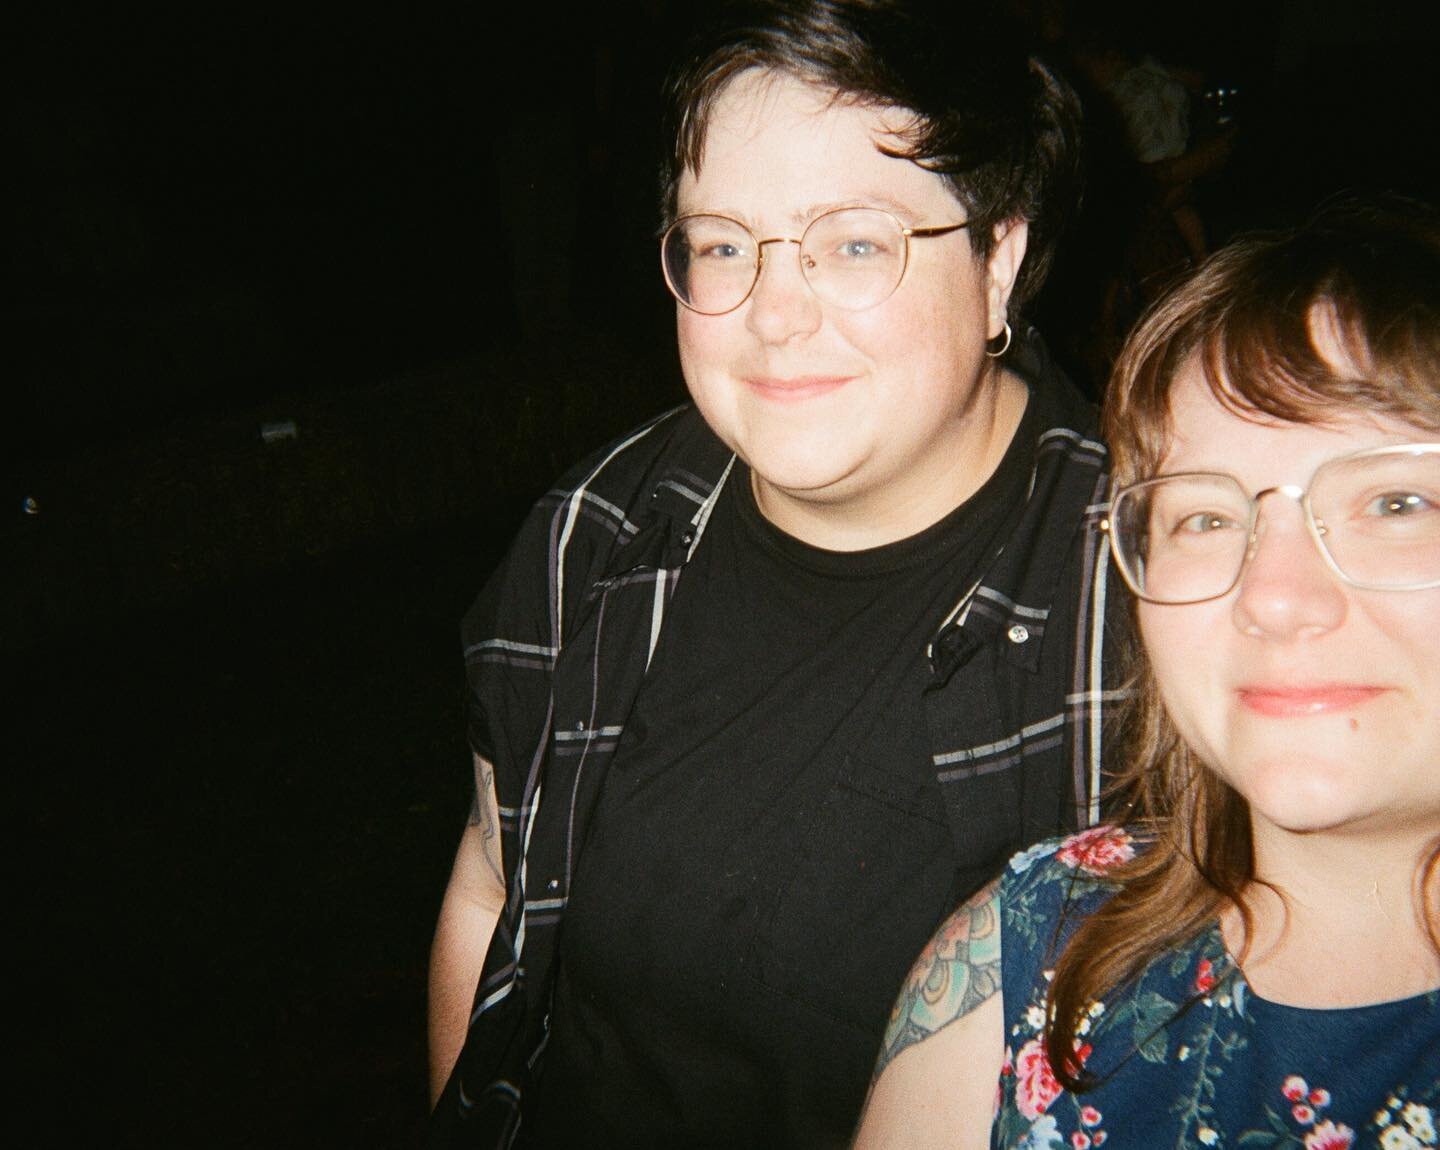 A few funny little disposable camera snaps made by guests (friends) at Anna + Zach&rsquo;s wedding back in June. Looking a little sweaty&hellip; but absolutely having a lovely time, haha. 😊😌😇